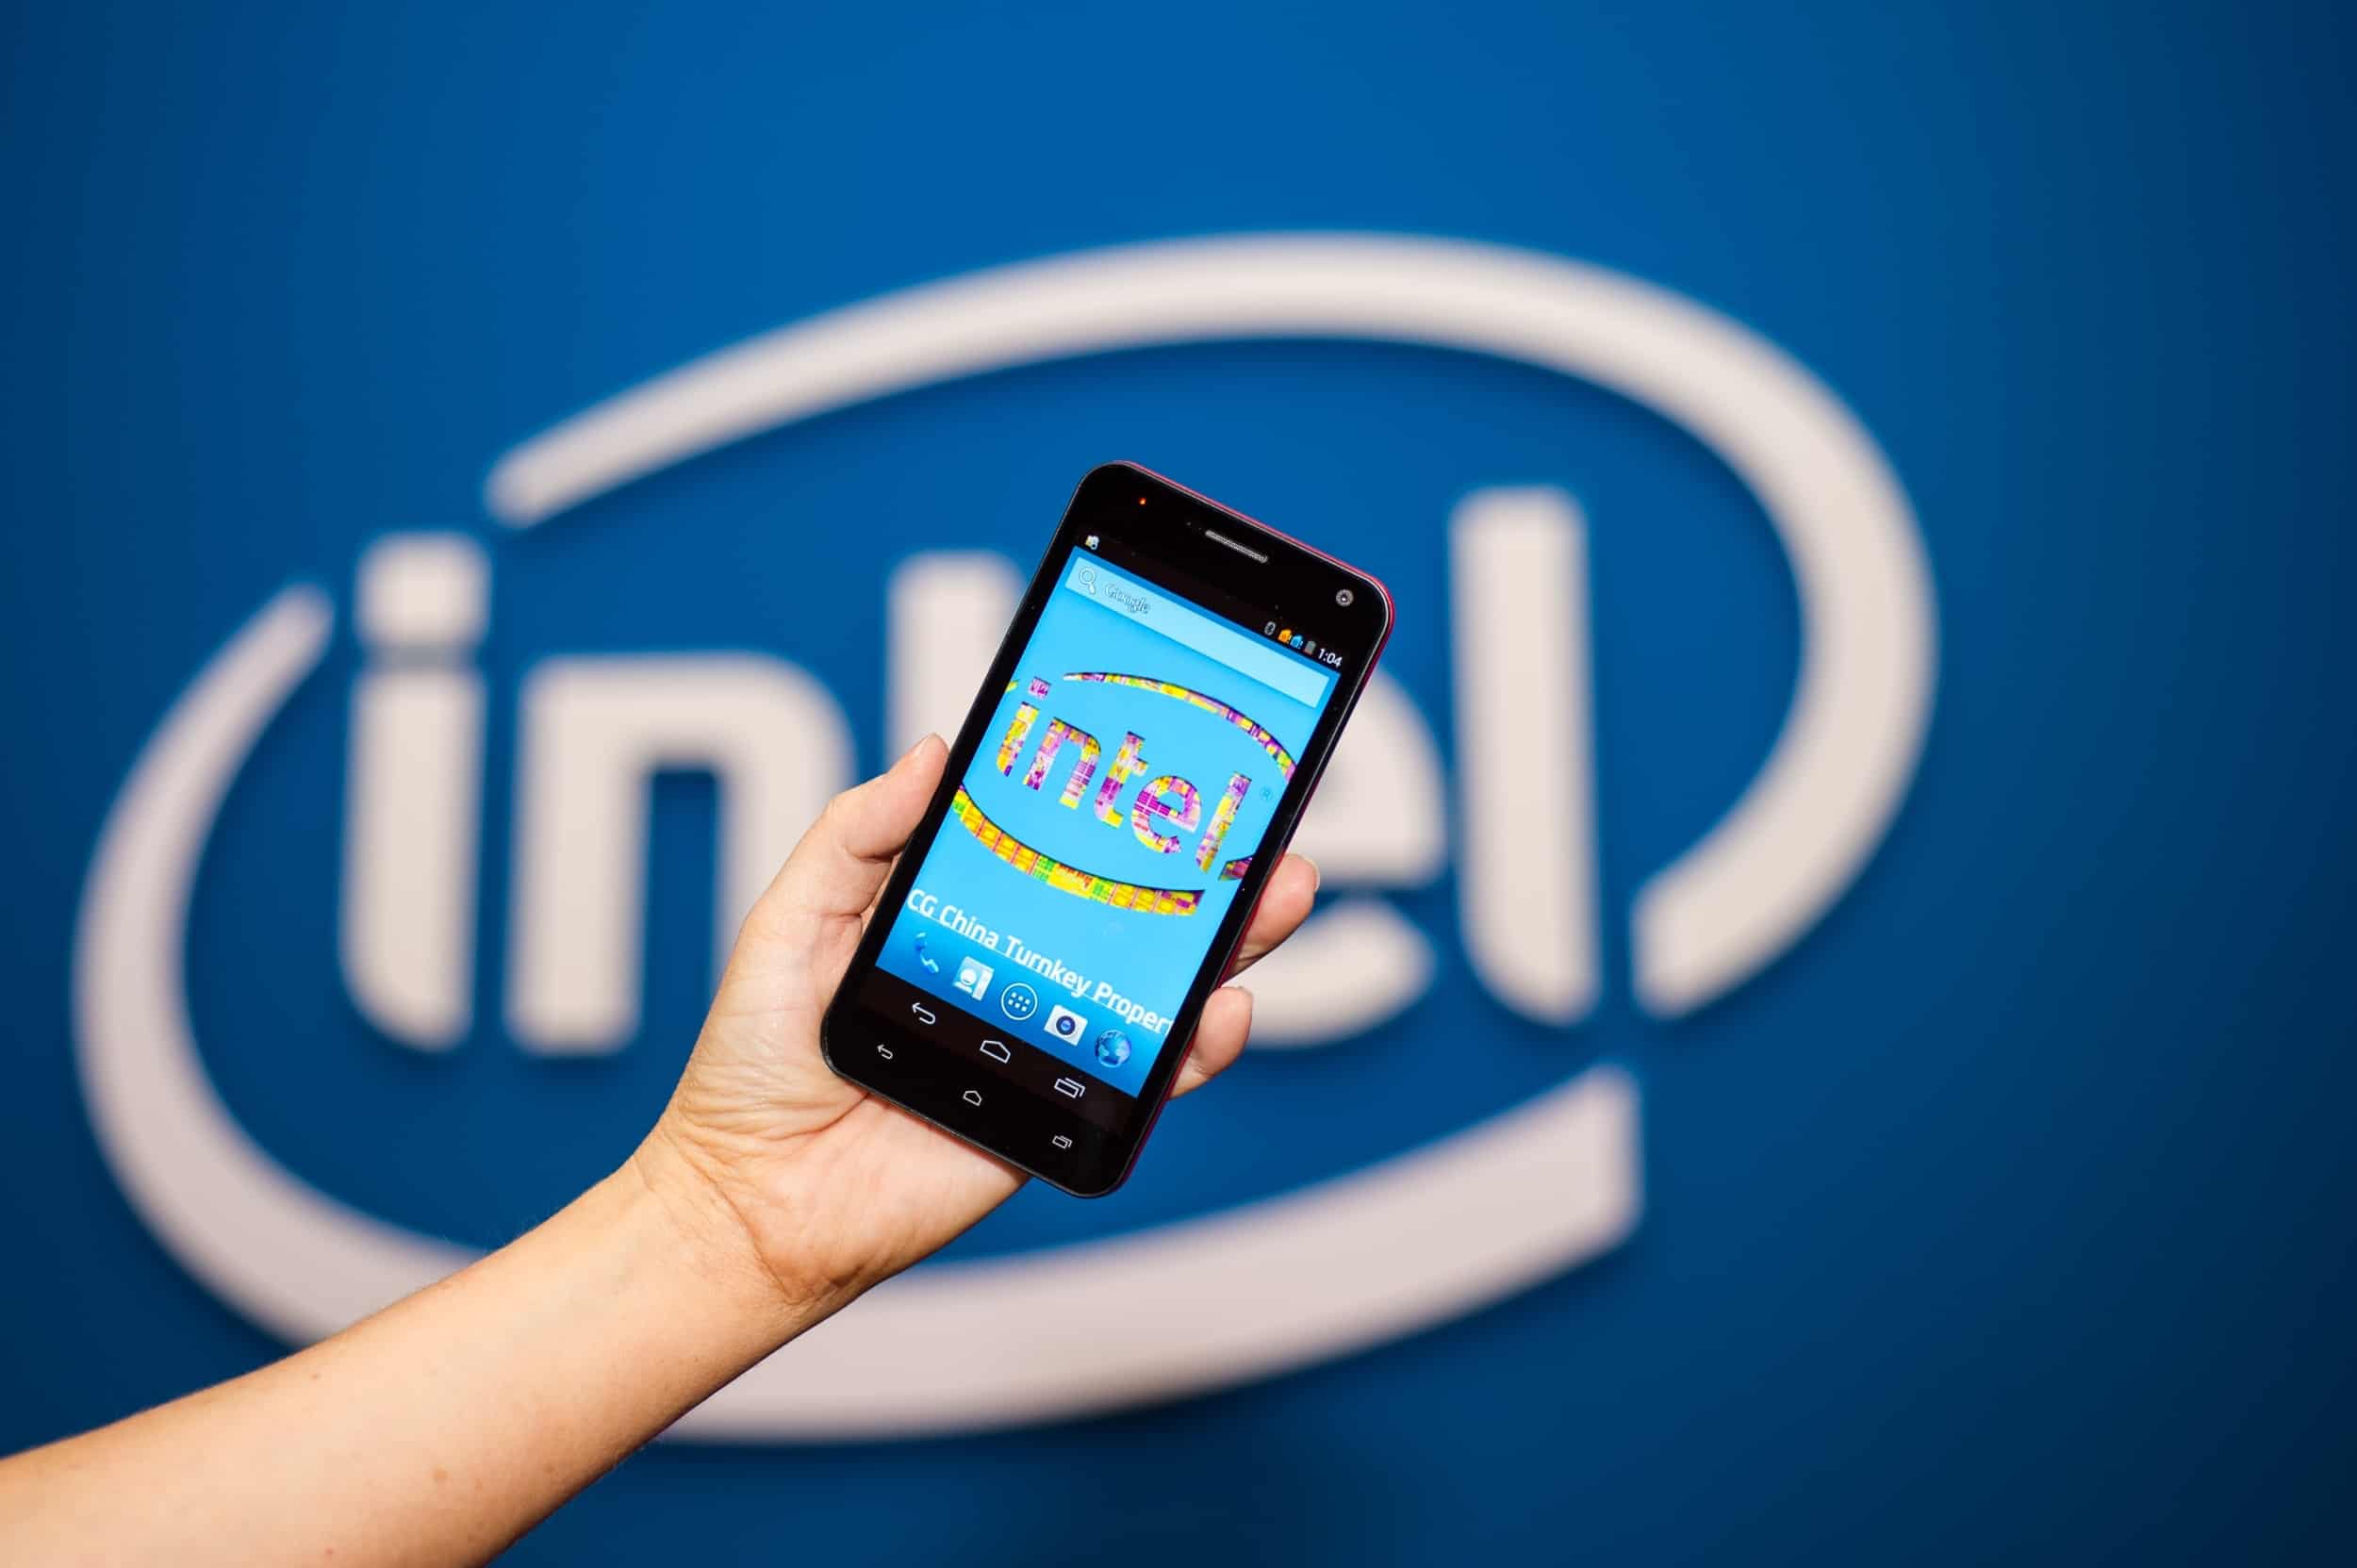 Intel Acquires Altera for $16.7B to Strengthen Data Center &amp; IoT Market Segments